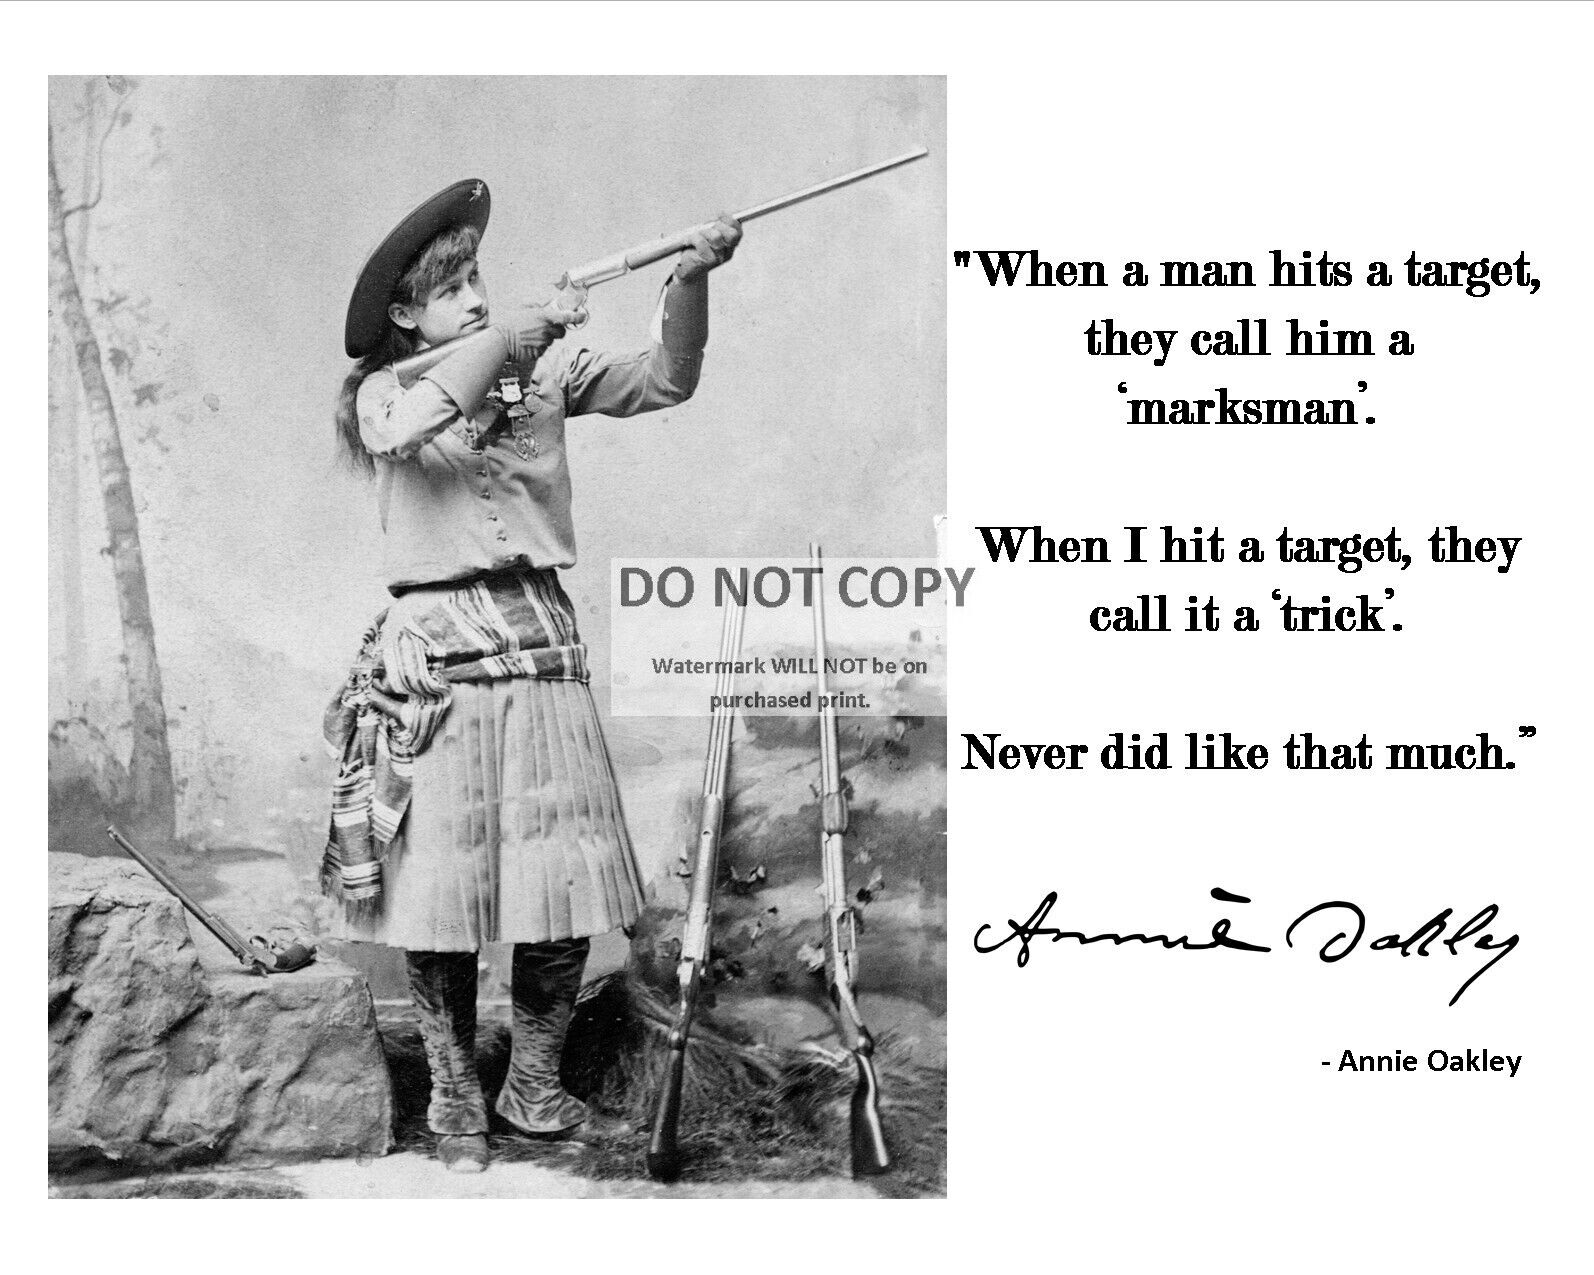 ANNIE OAKLEY EXHIBITION SHARPSHOOTER PHOTO AND QUOTE - 8X10 PHOTO (PQ041)